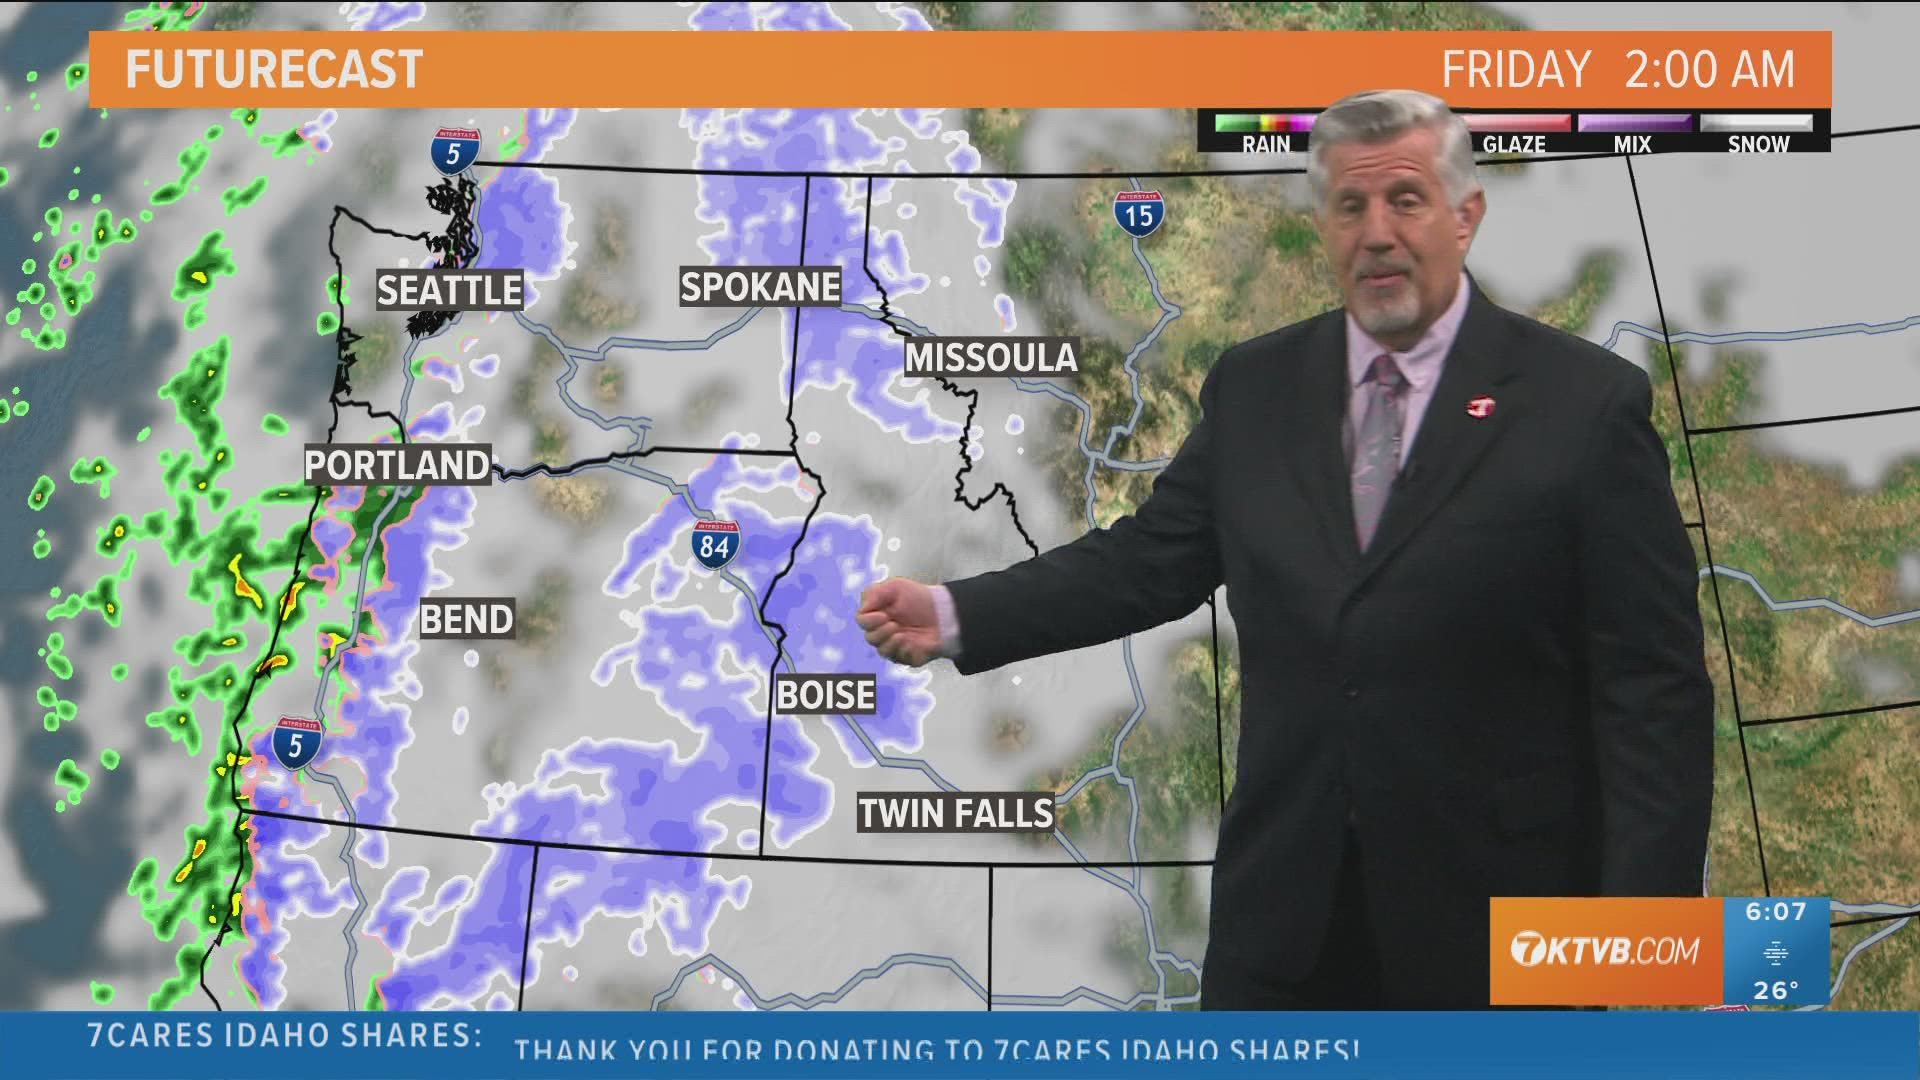 KTVB First Alert Weather Tuesday, Dec. 6, 2022, with meteorologist Jim Duthie in Boise, Idaho.